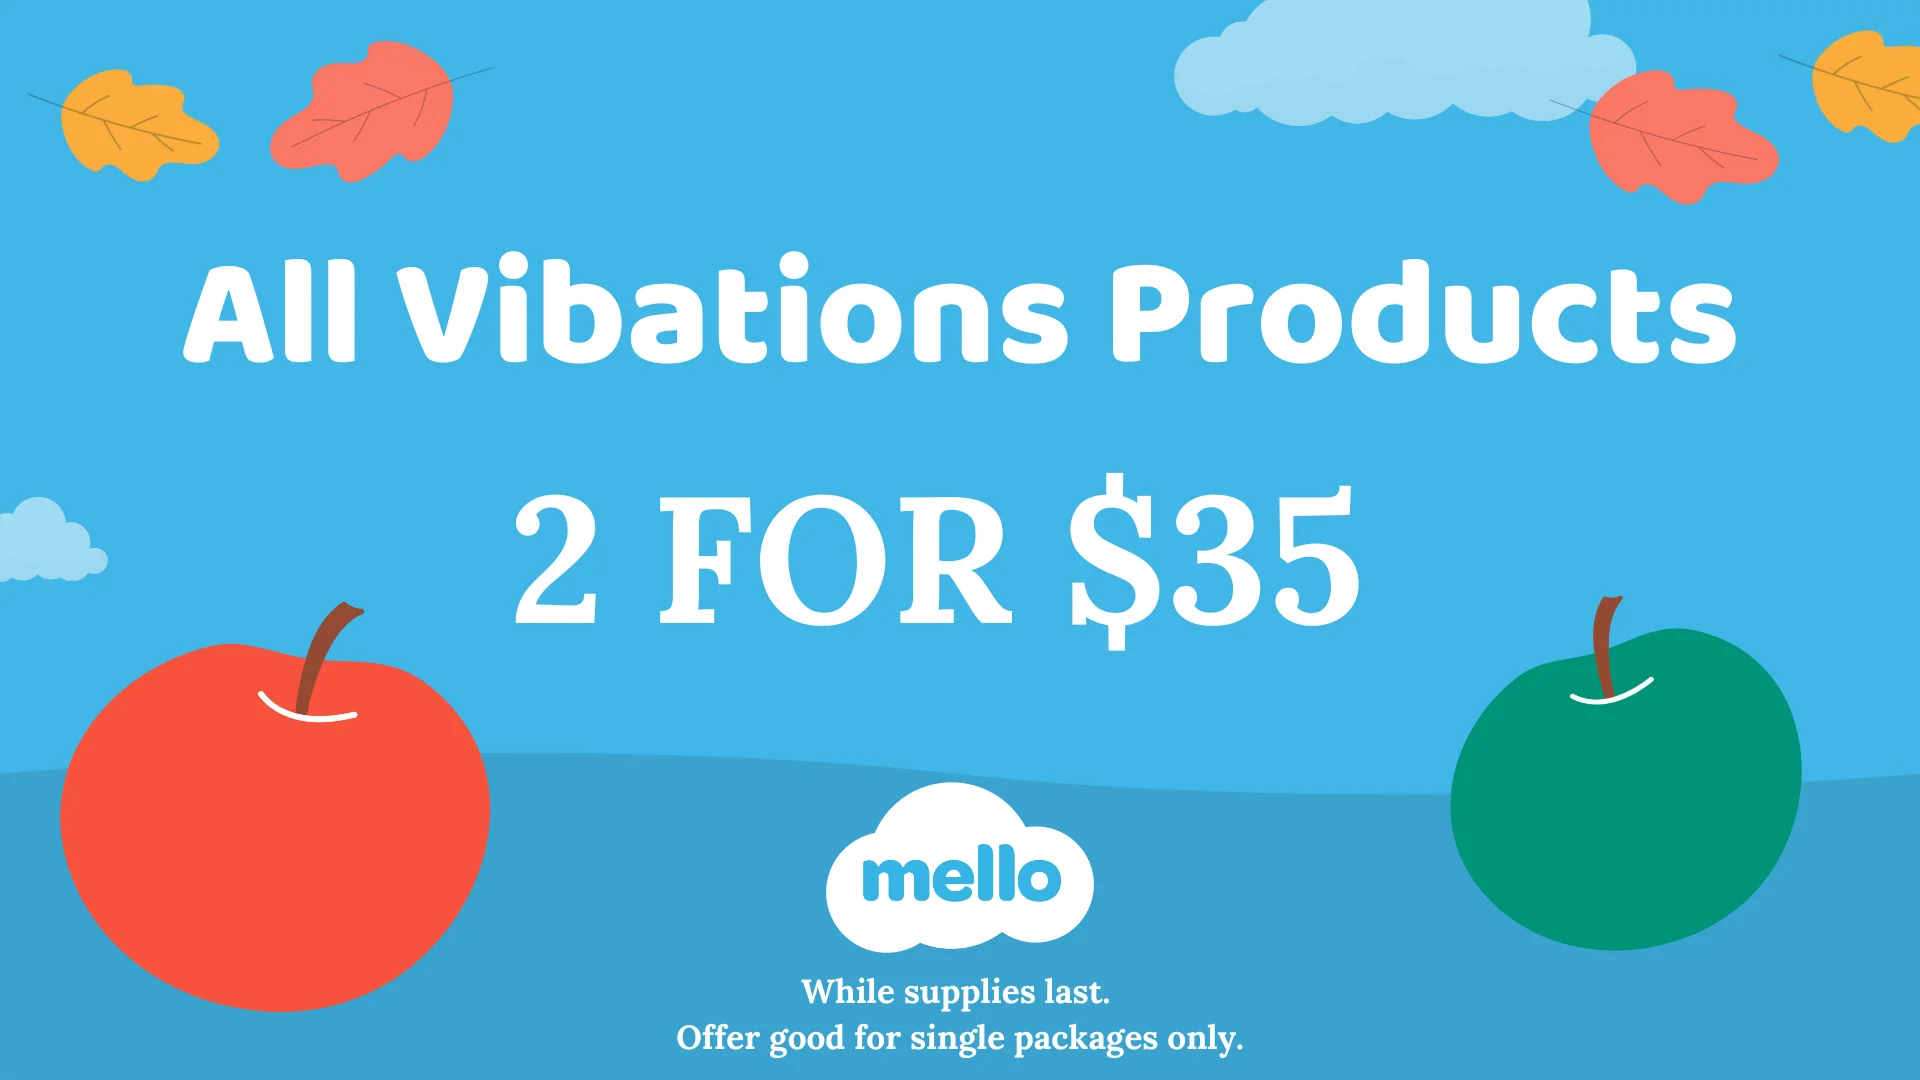 VIBATIONS PRODUCTS 2 for $35